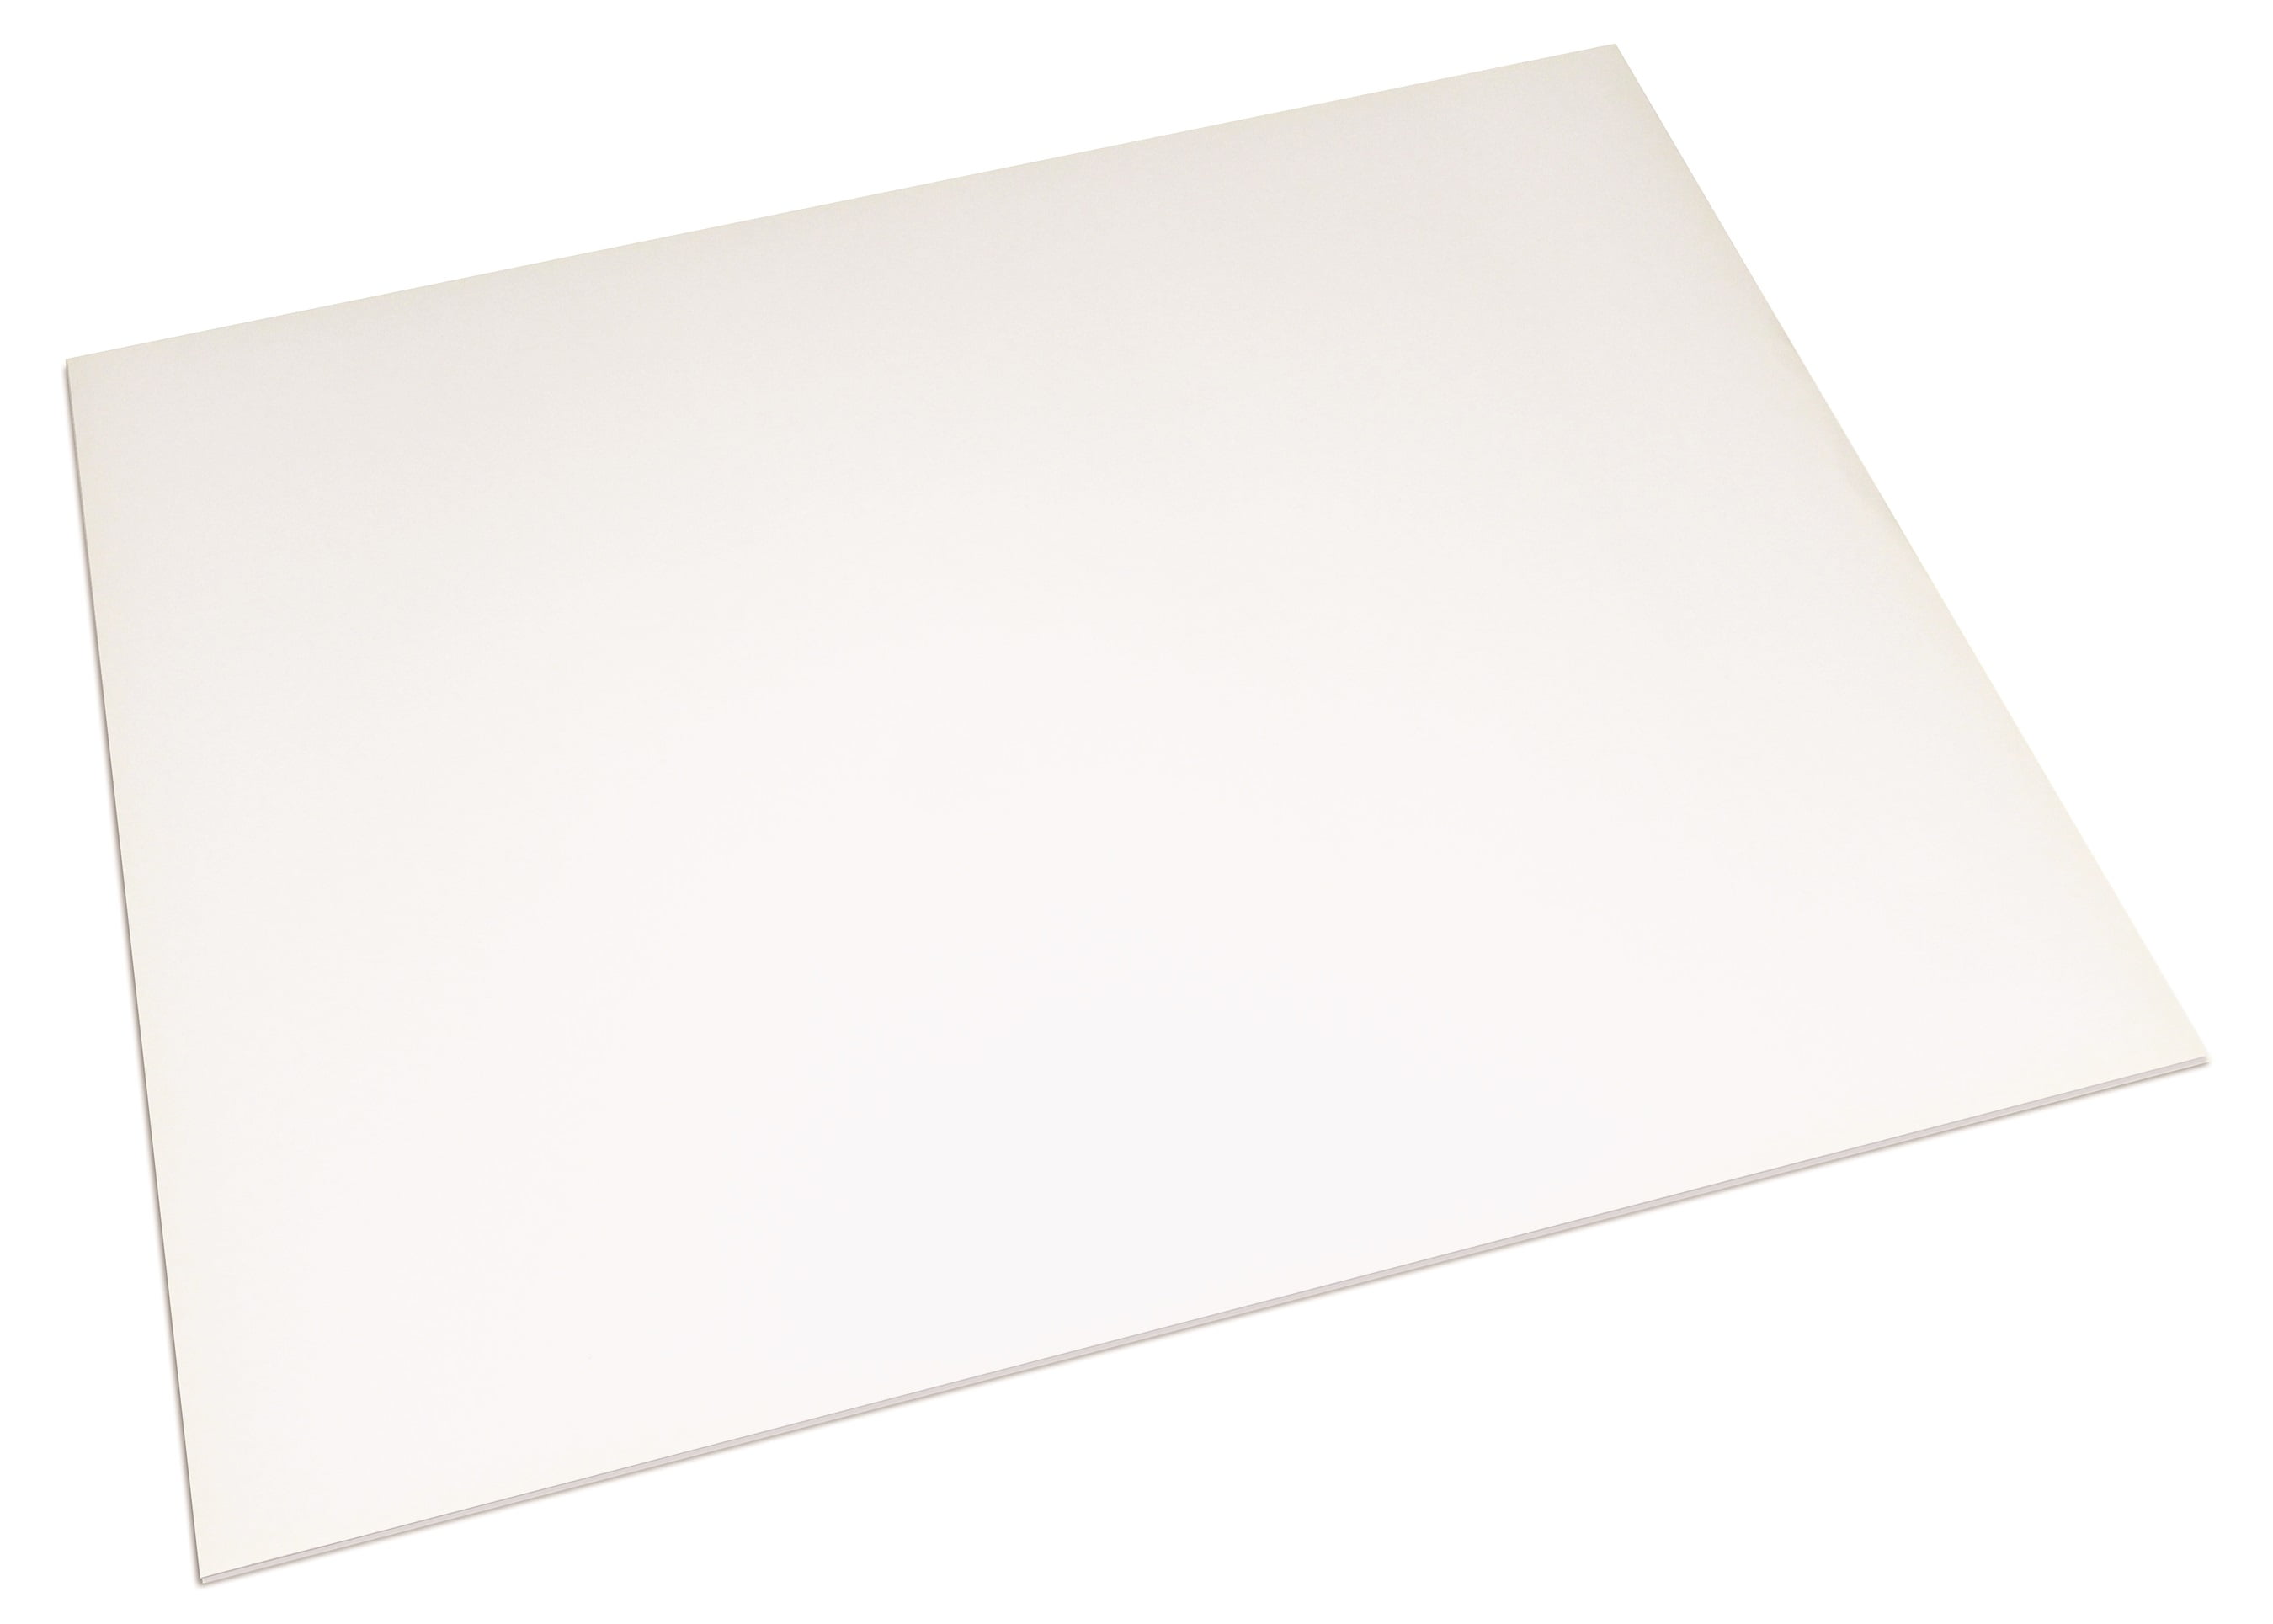 Excelsis Design 15 Pack Foam Board 20x24 Inches